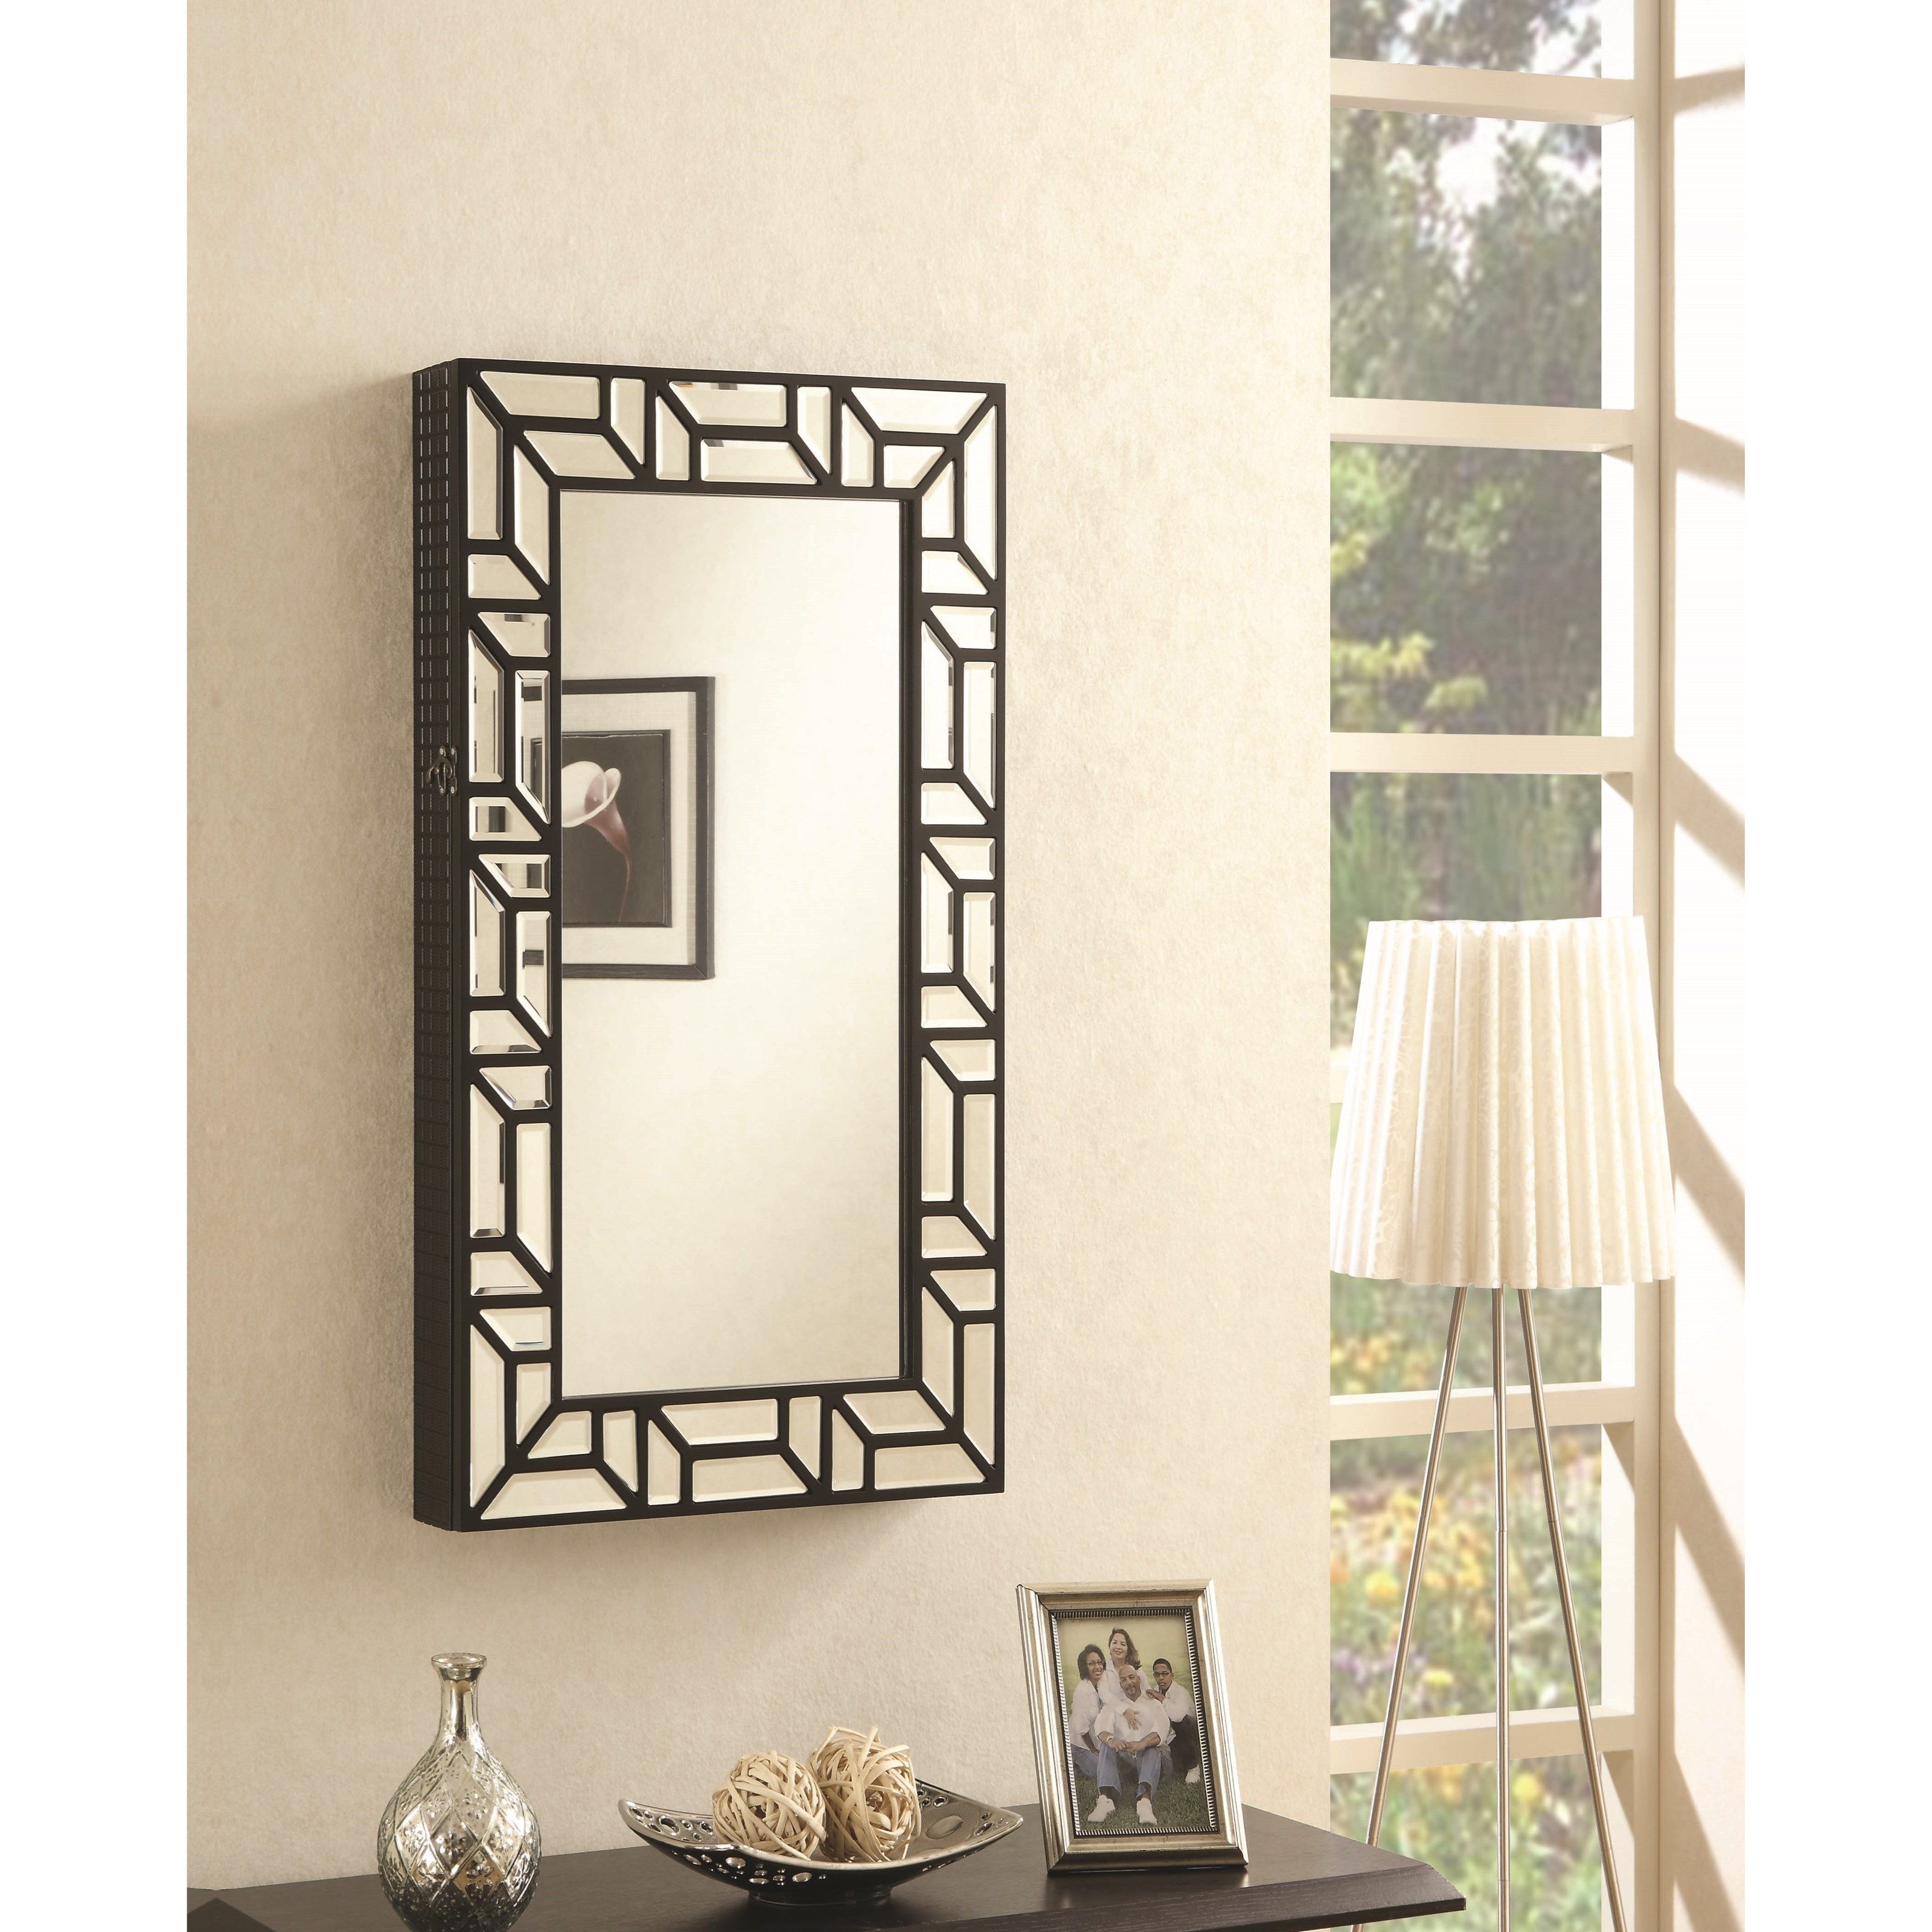 Accent Mirrors Wall Mounted Jewelry Armoire Throughout Favorite Accent Mirrors (View 5 of 20)